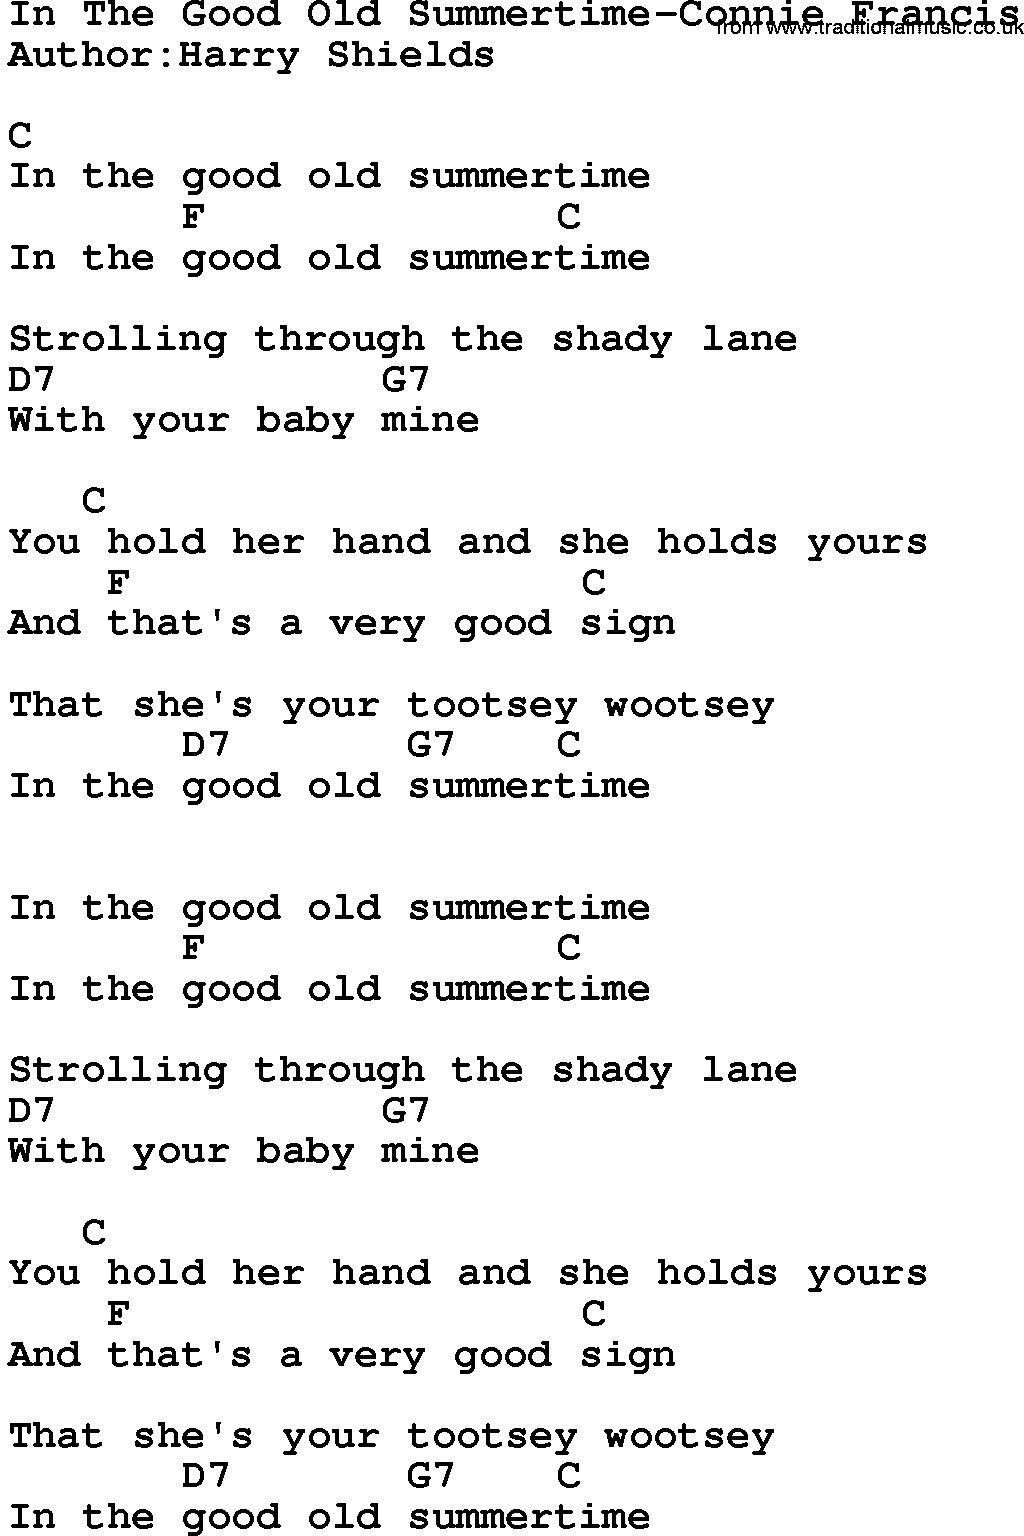 Country music song: In The Good Old Summertime-Connie Francis  lyrics and chords